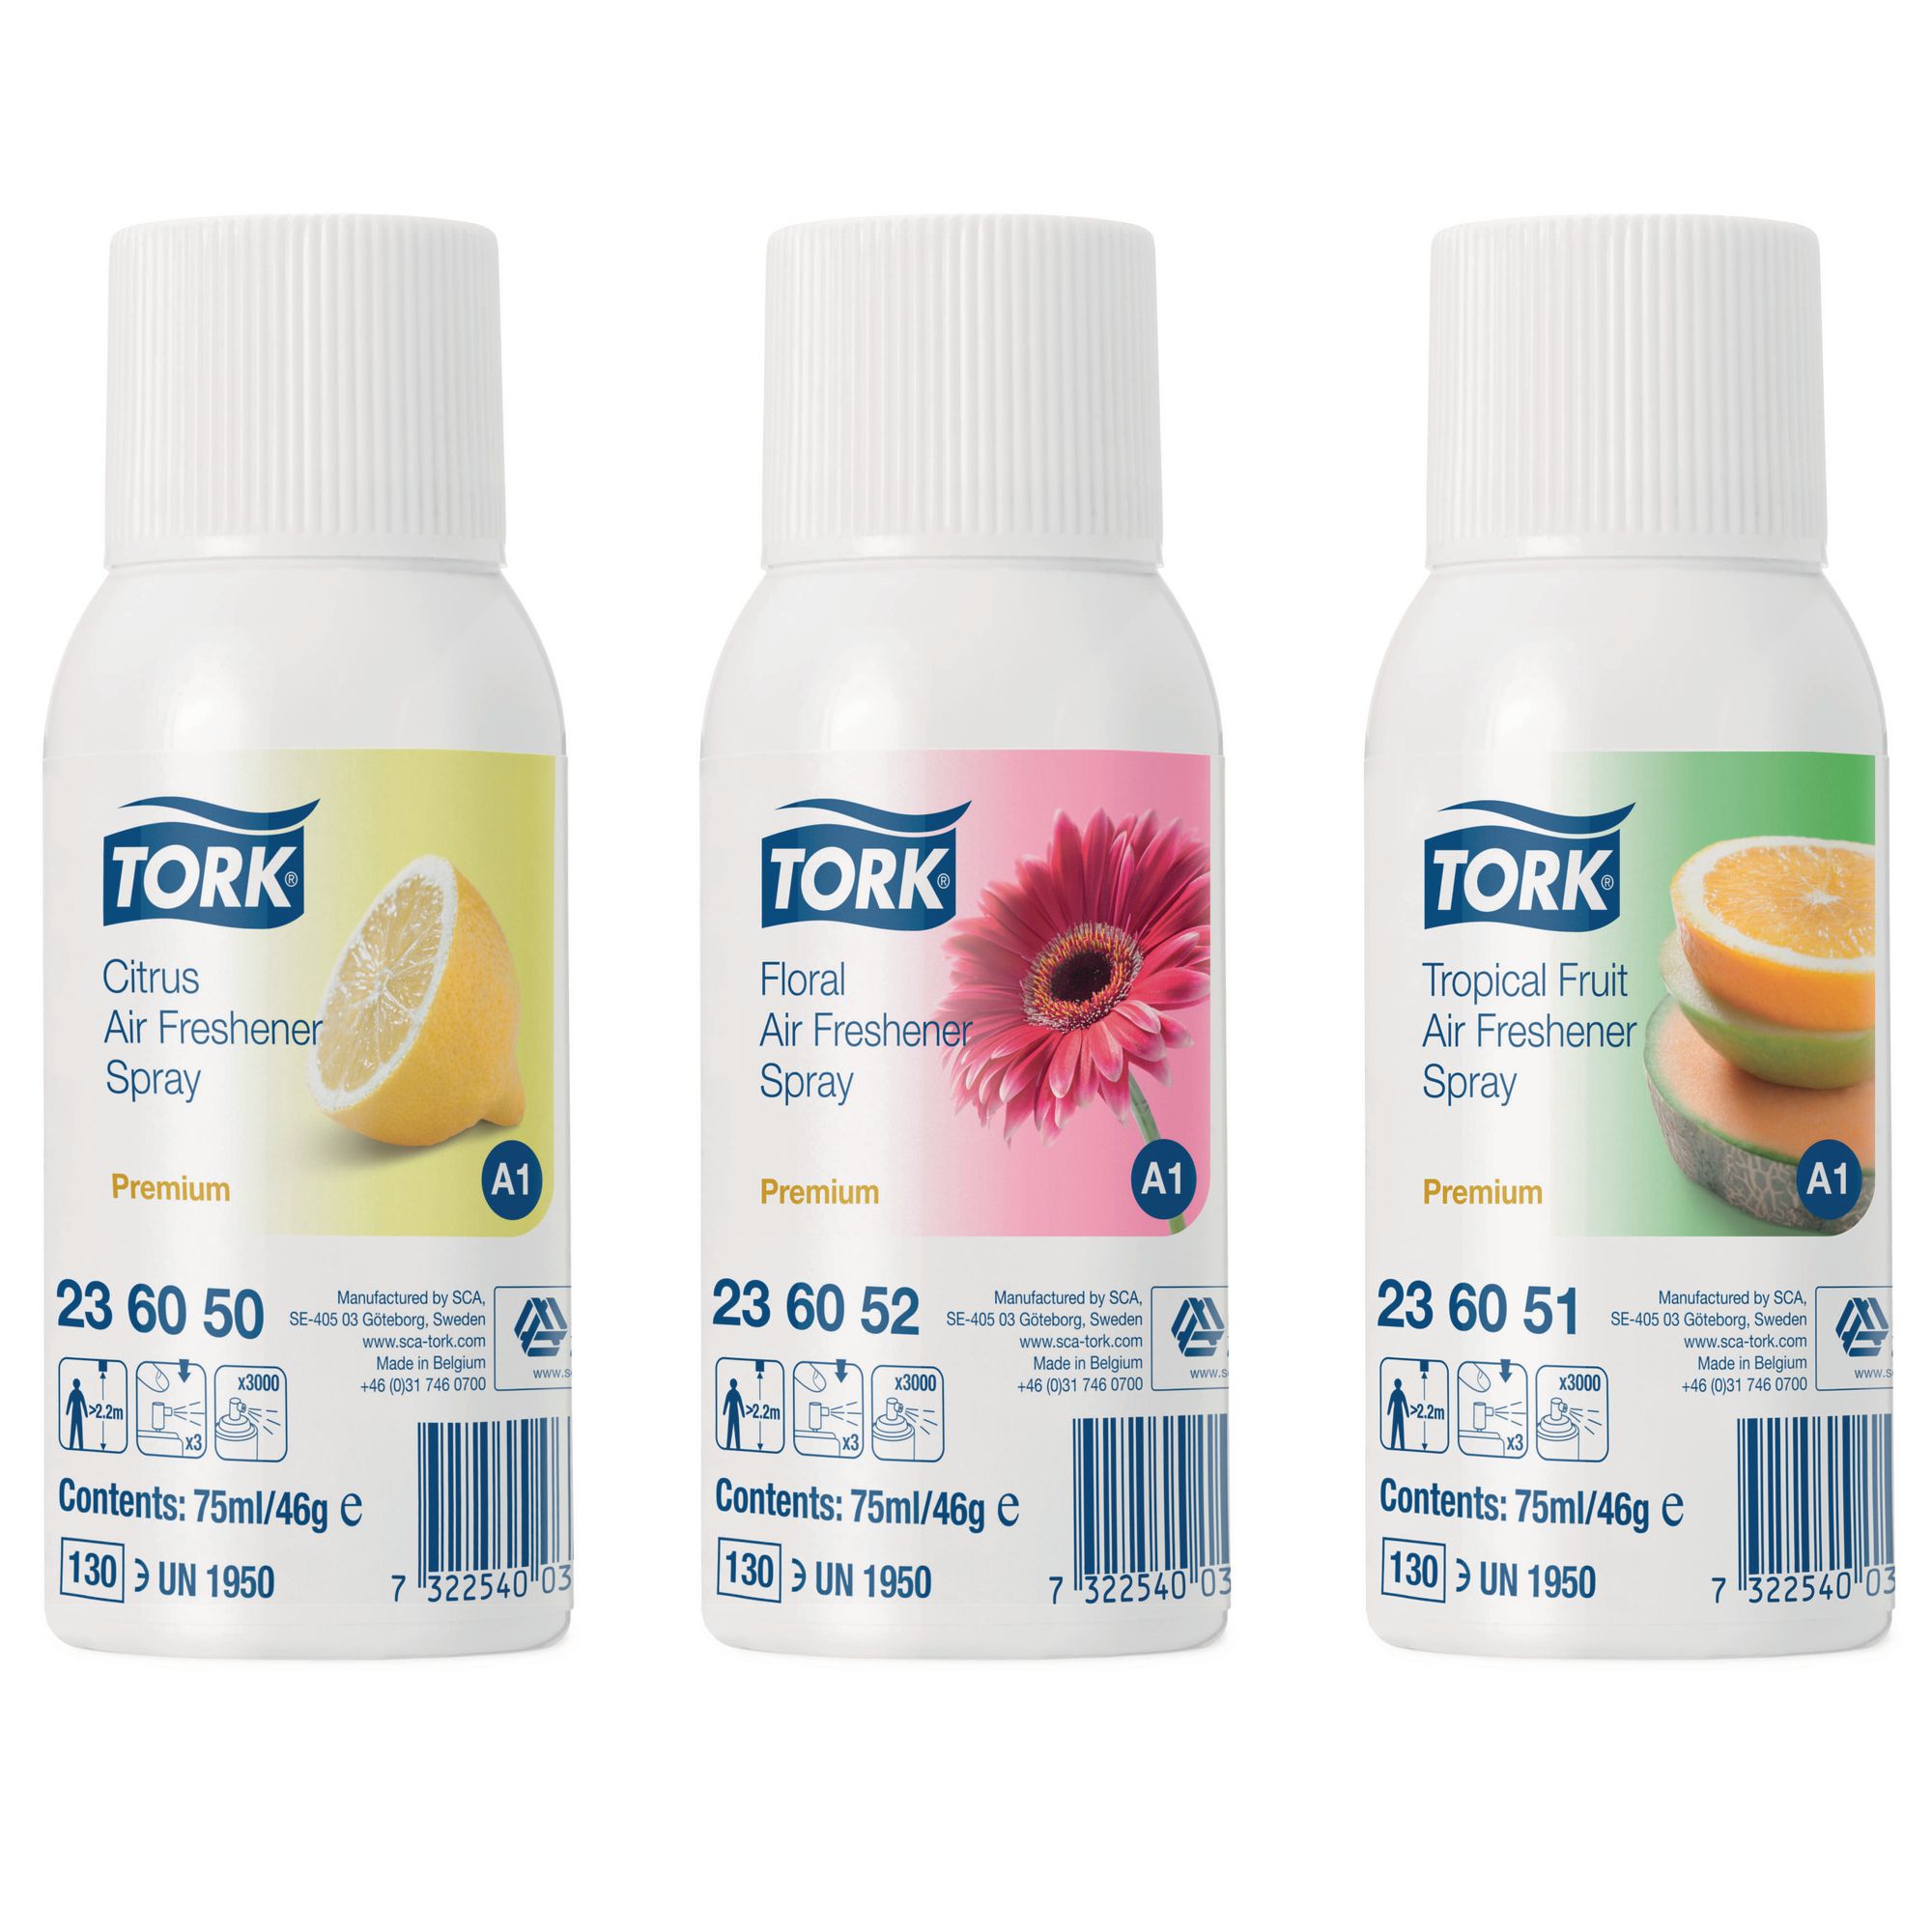 G1571173 - TORK Air Freshener Spray - Mixed Scent - Pack of 12